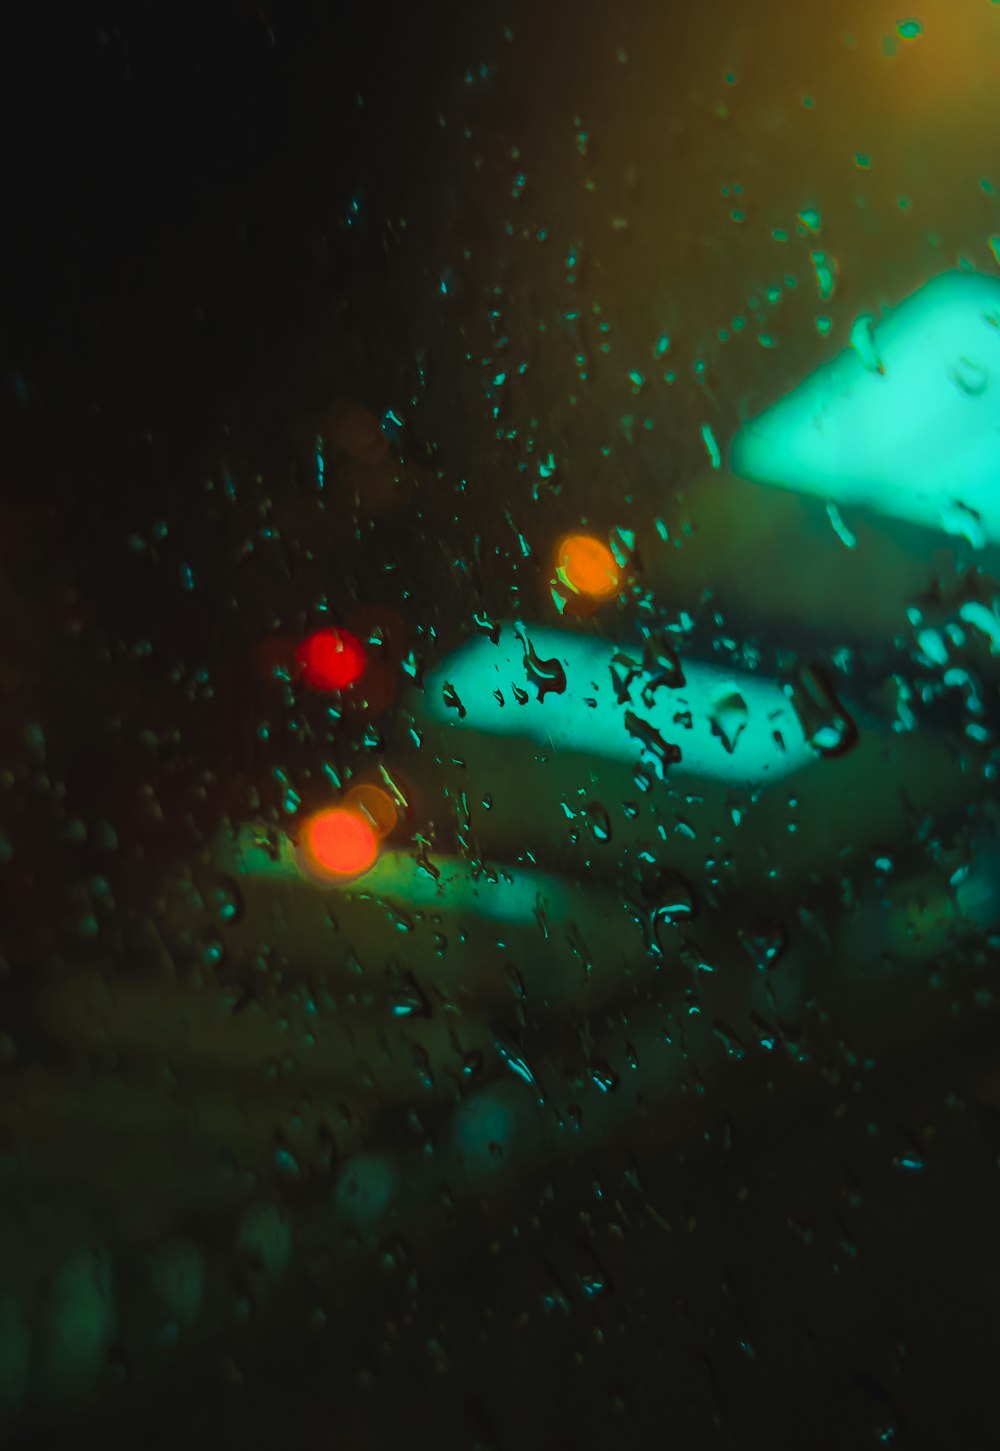 a close up of a car's windshield with rain drops